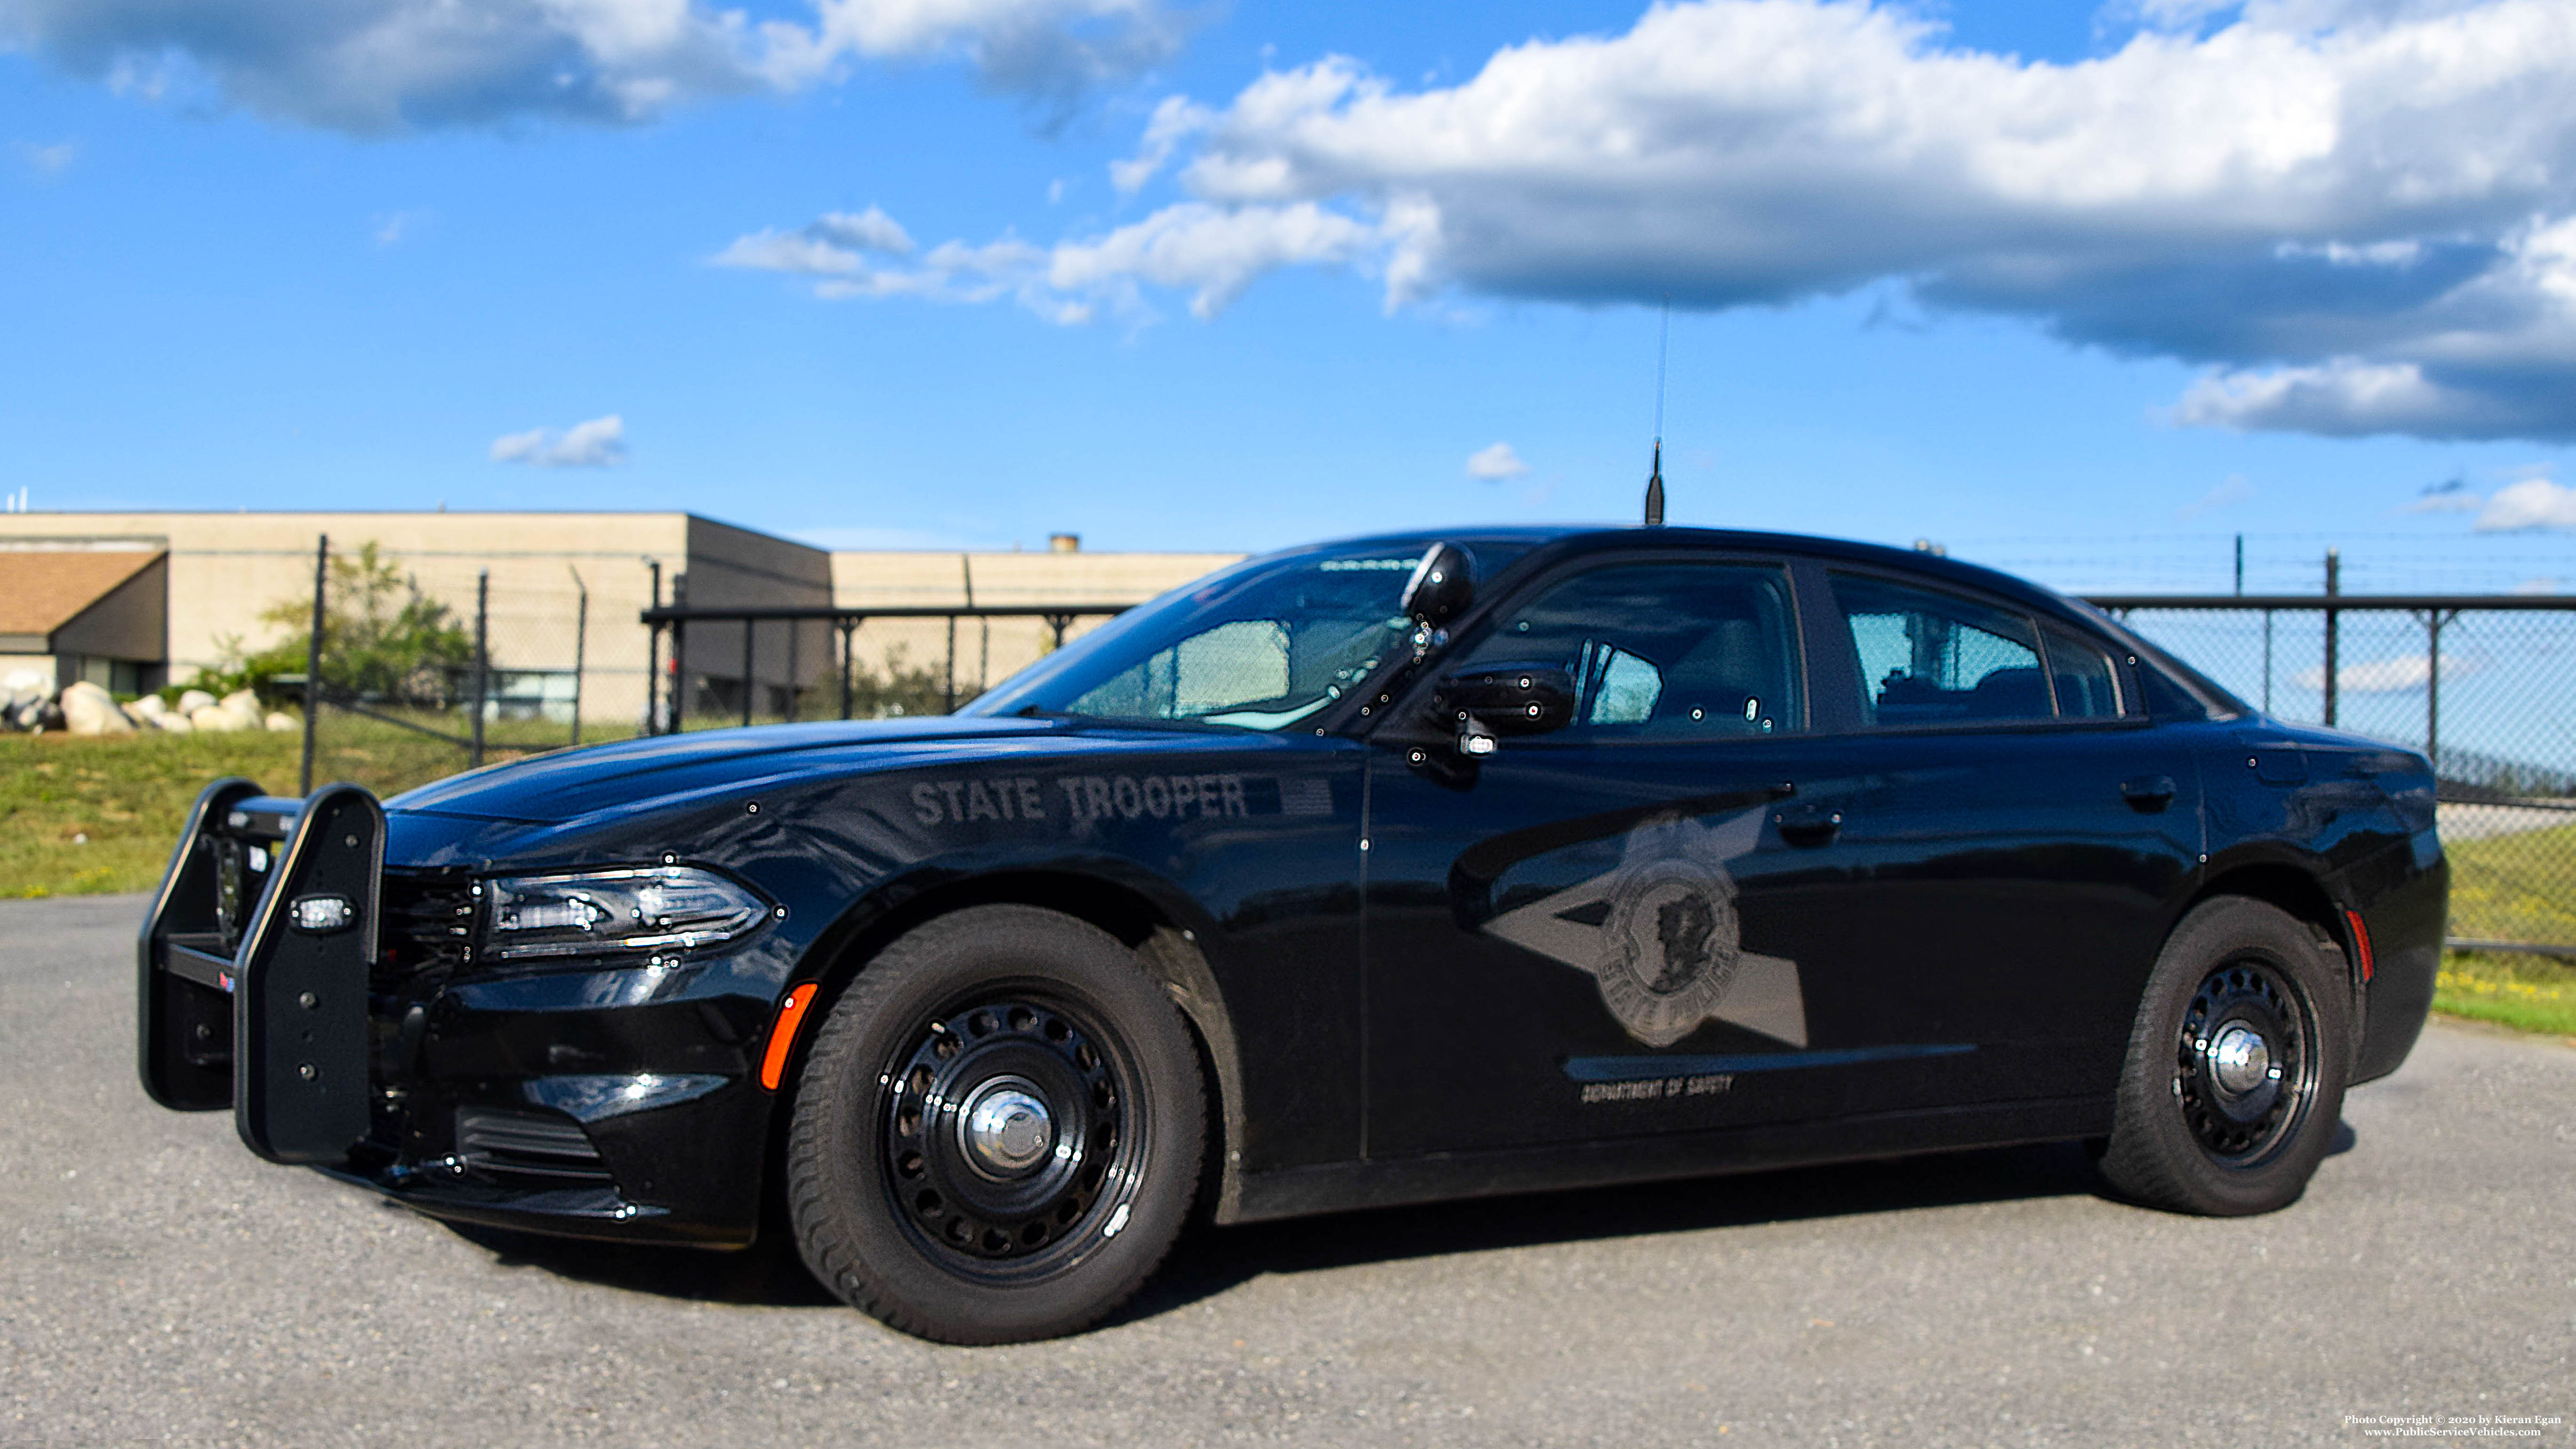 A photo  of New Hampshire State Police
            Cruiser 111, a 2018 Dodge Charger             taken by Kieran Egan